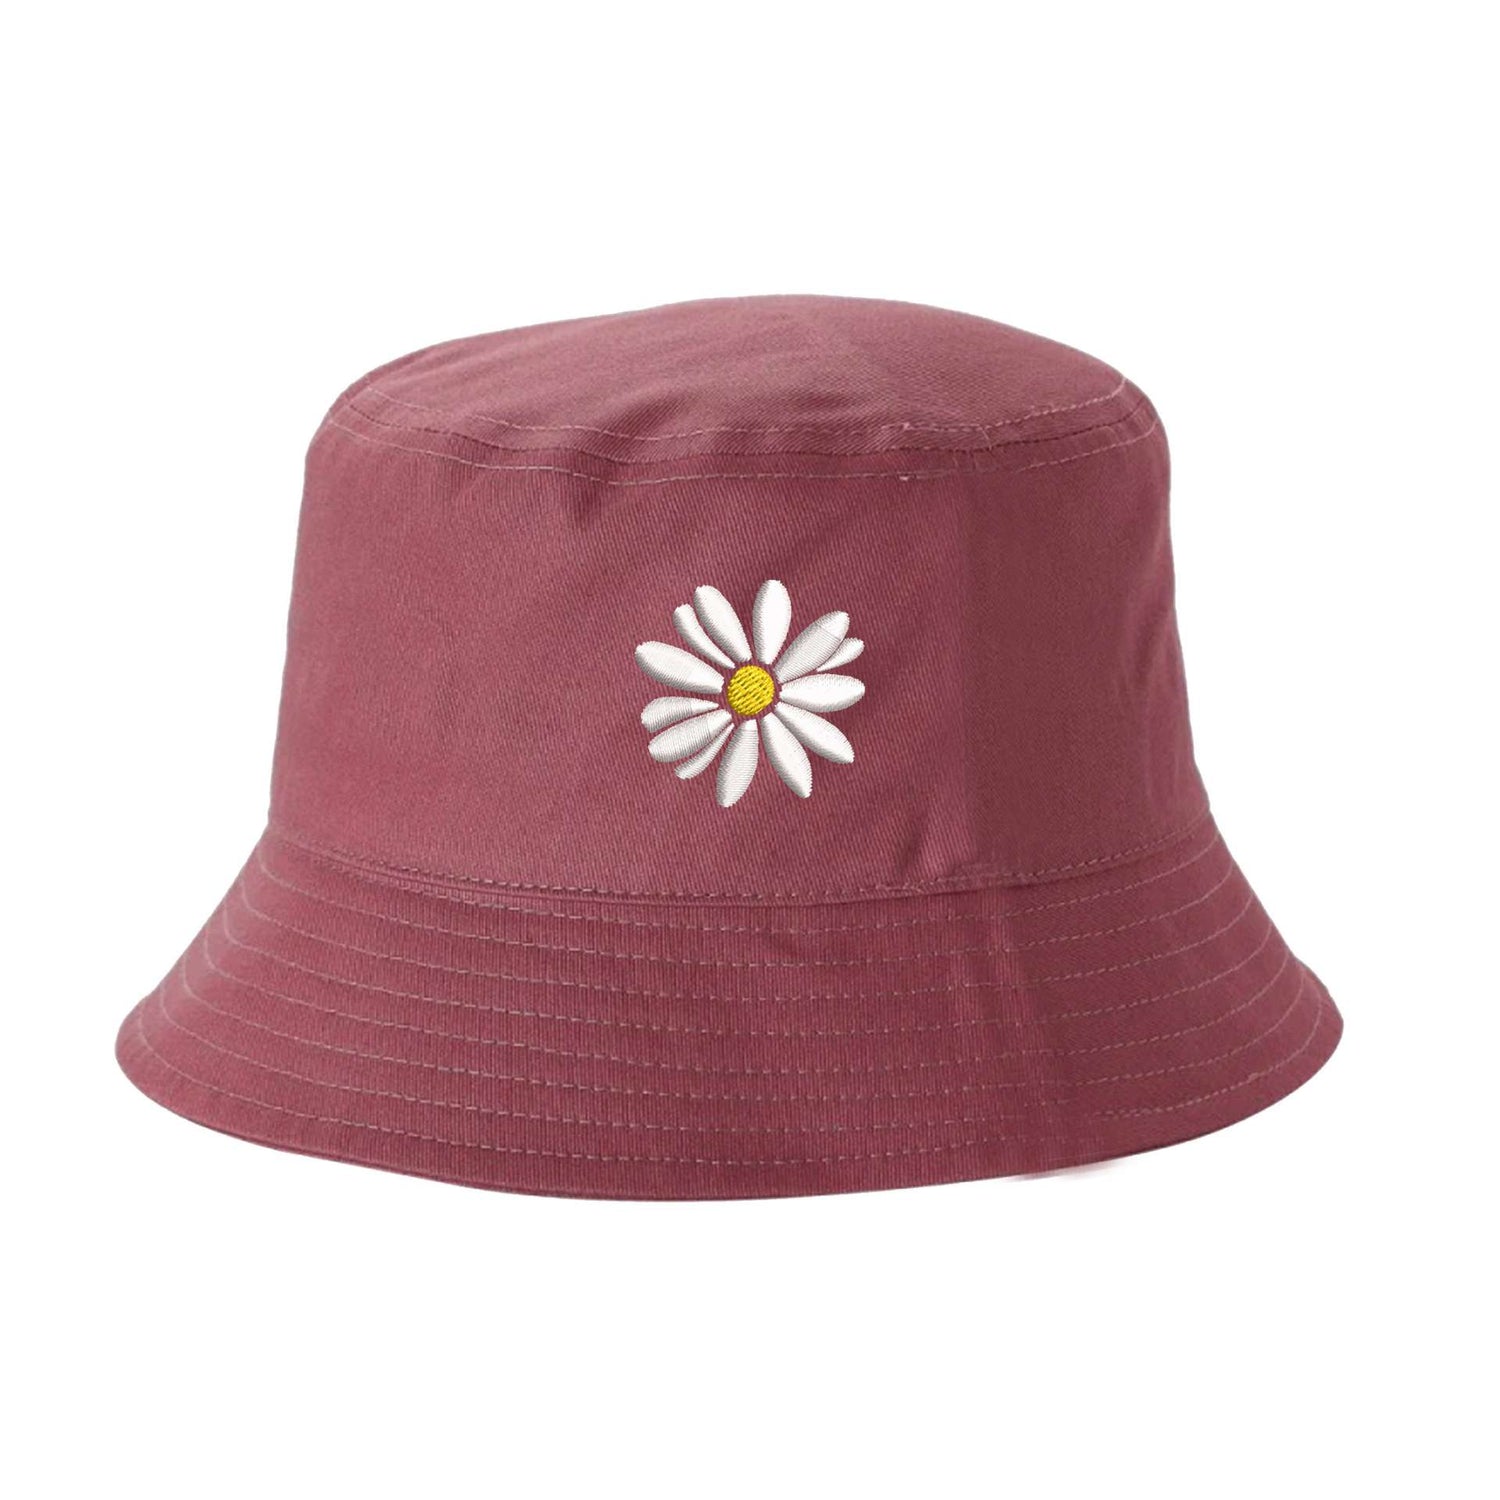 Dark Mauve Bucket hat embroidered with a daisy flower - DSY Lifestyle